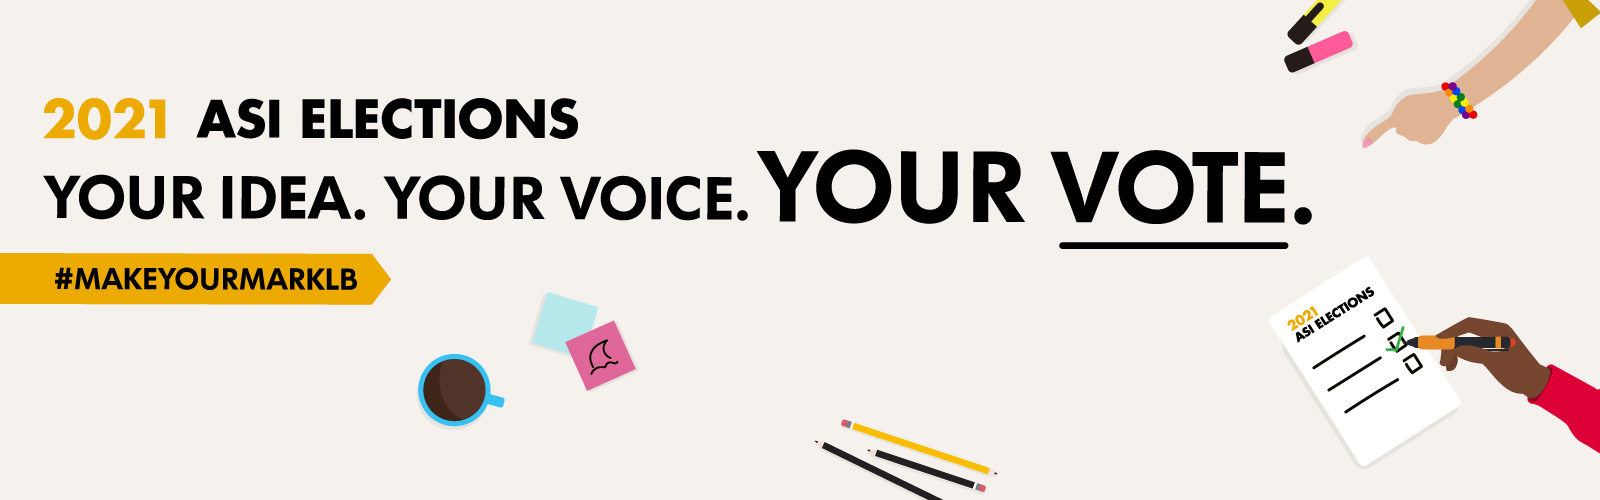 Graphic: 2021 ASI Elections; YOUR IDEA. YOUR VOICE. YOUR VOTE. #MAKEYOURMARKLB